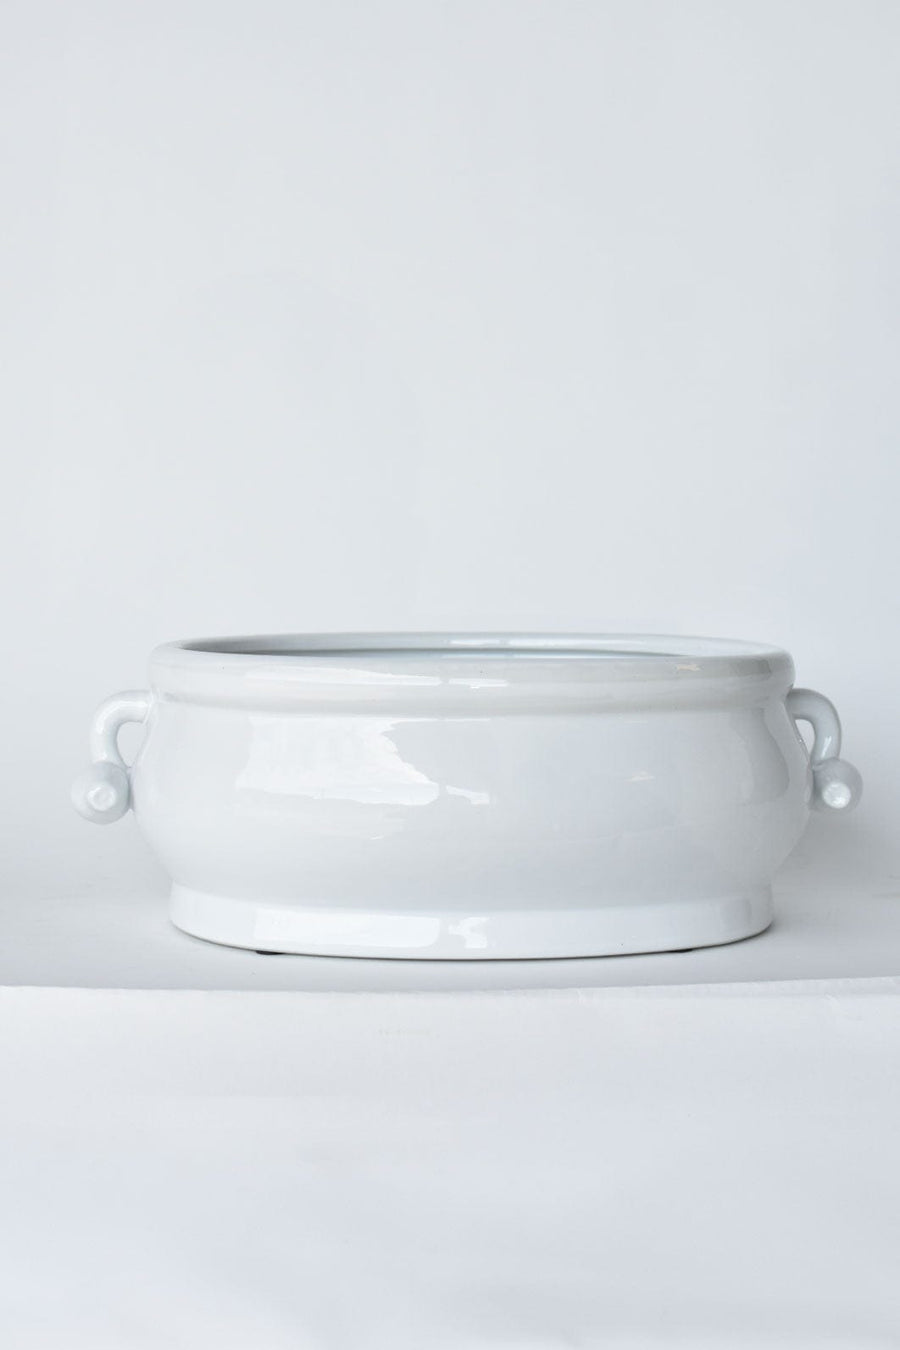 Creamware Oval Cachepot with Pomegranate